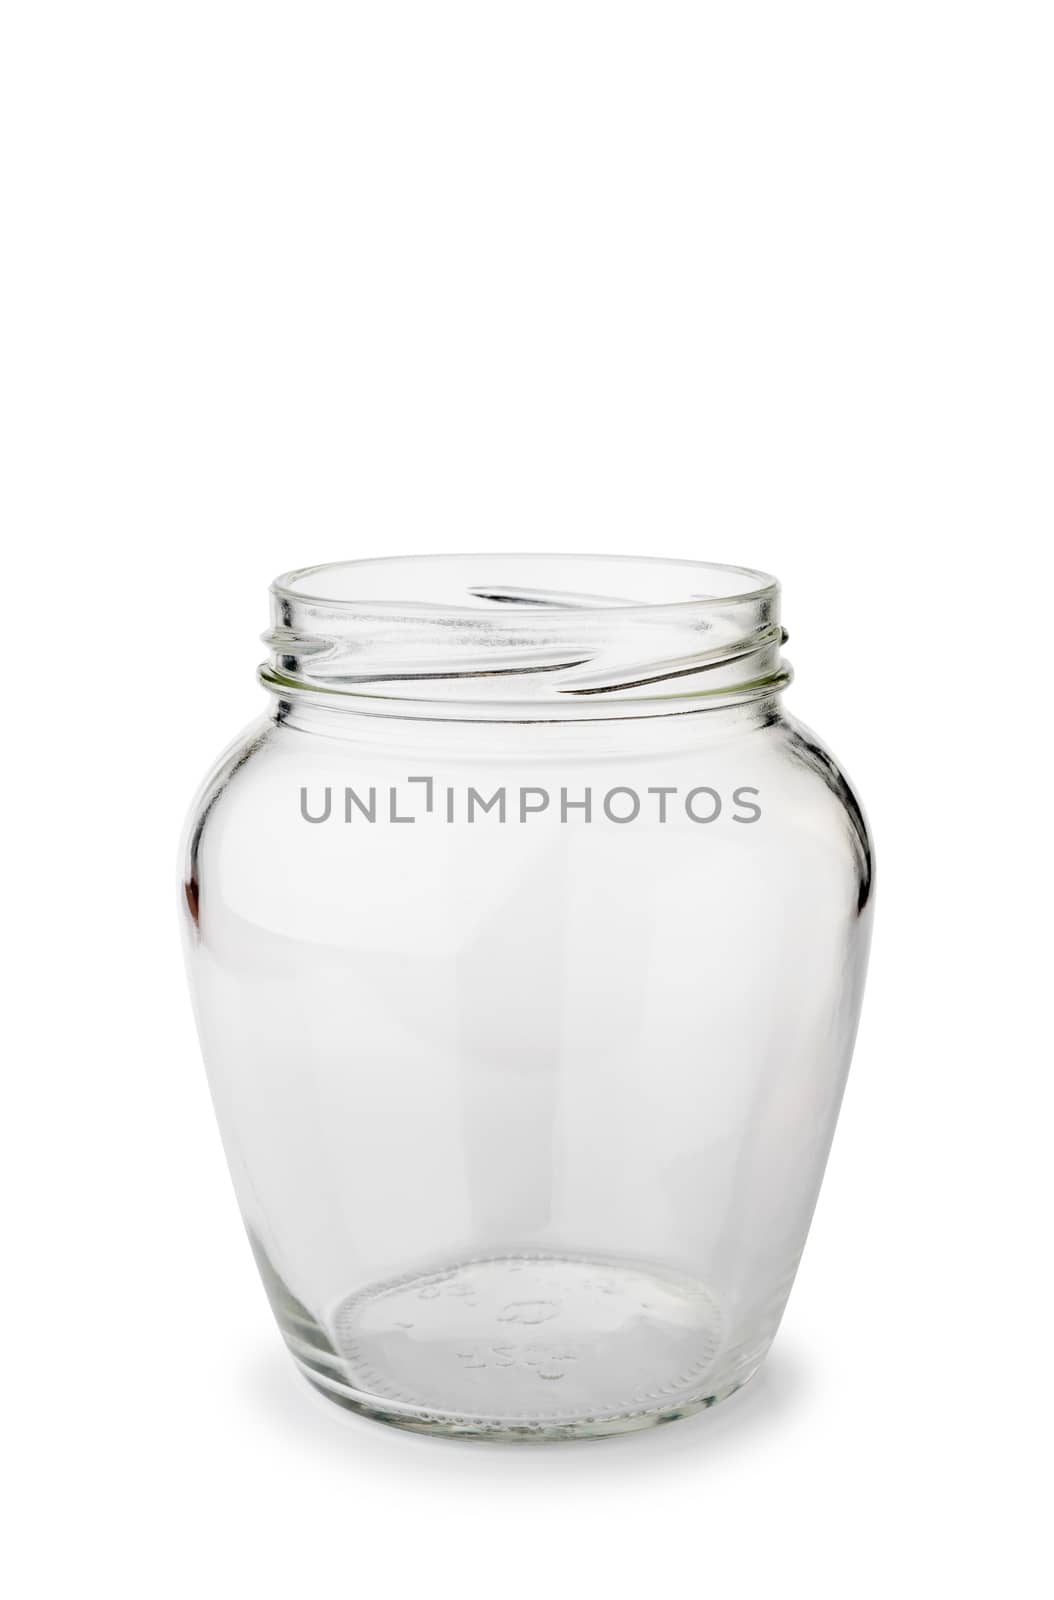 A paunchy open empty glass jar isolated on white background